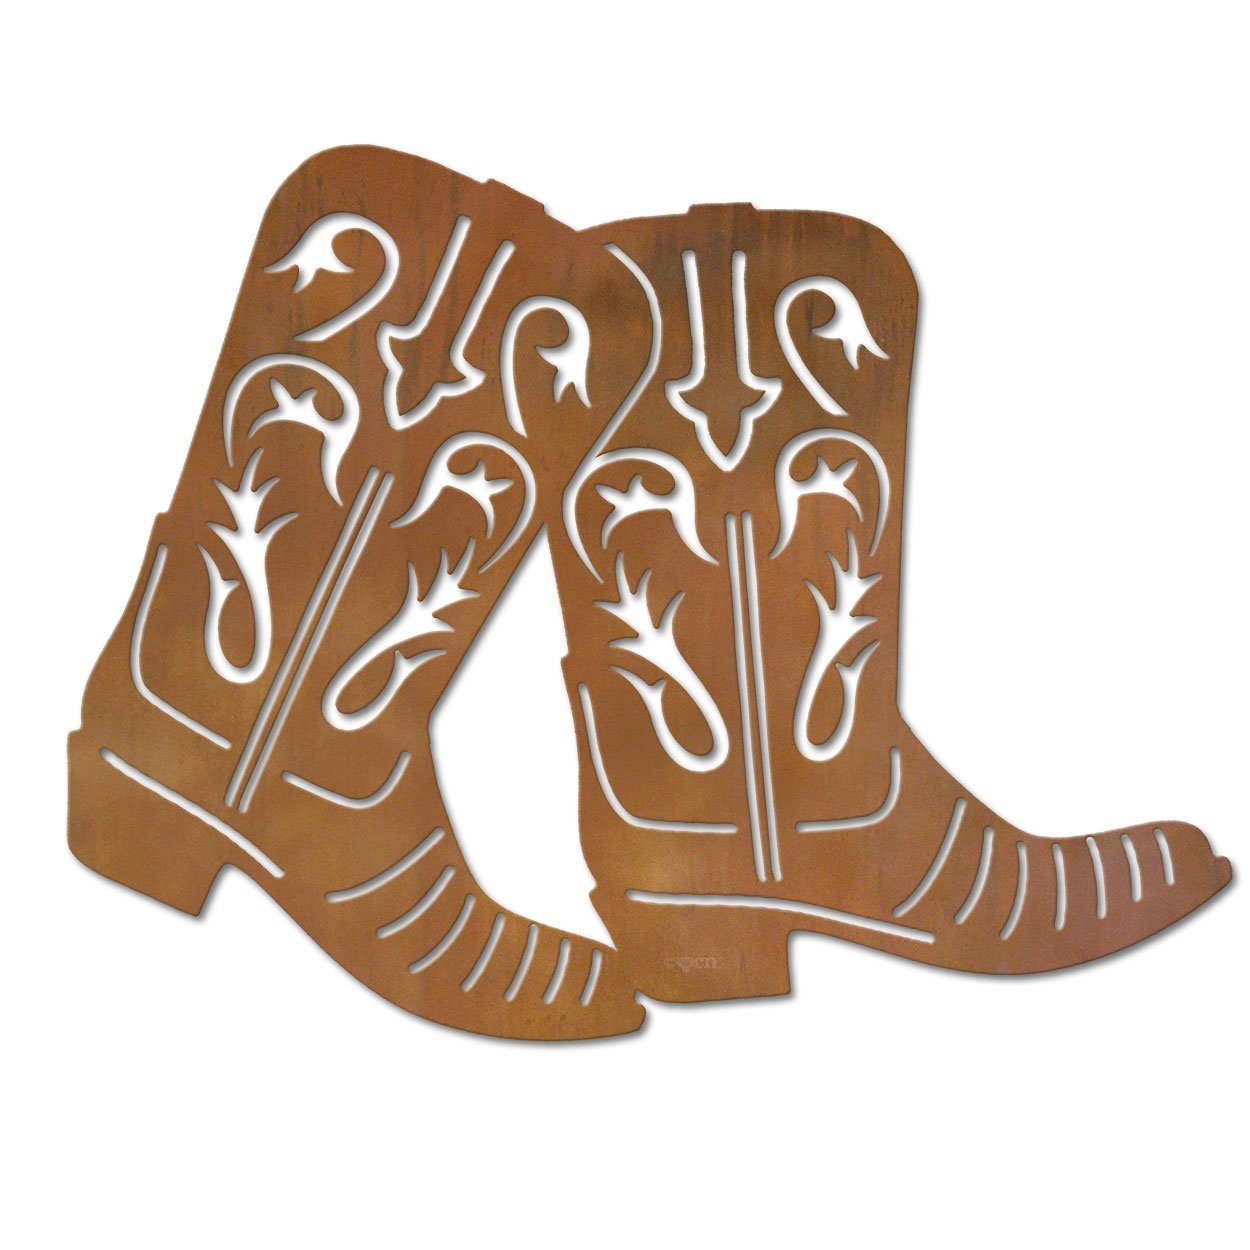 602005 - 44in Horizontal Western Boots XL Rustic Metal Wall Decor